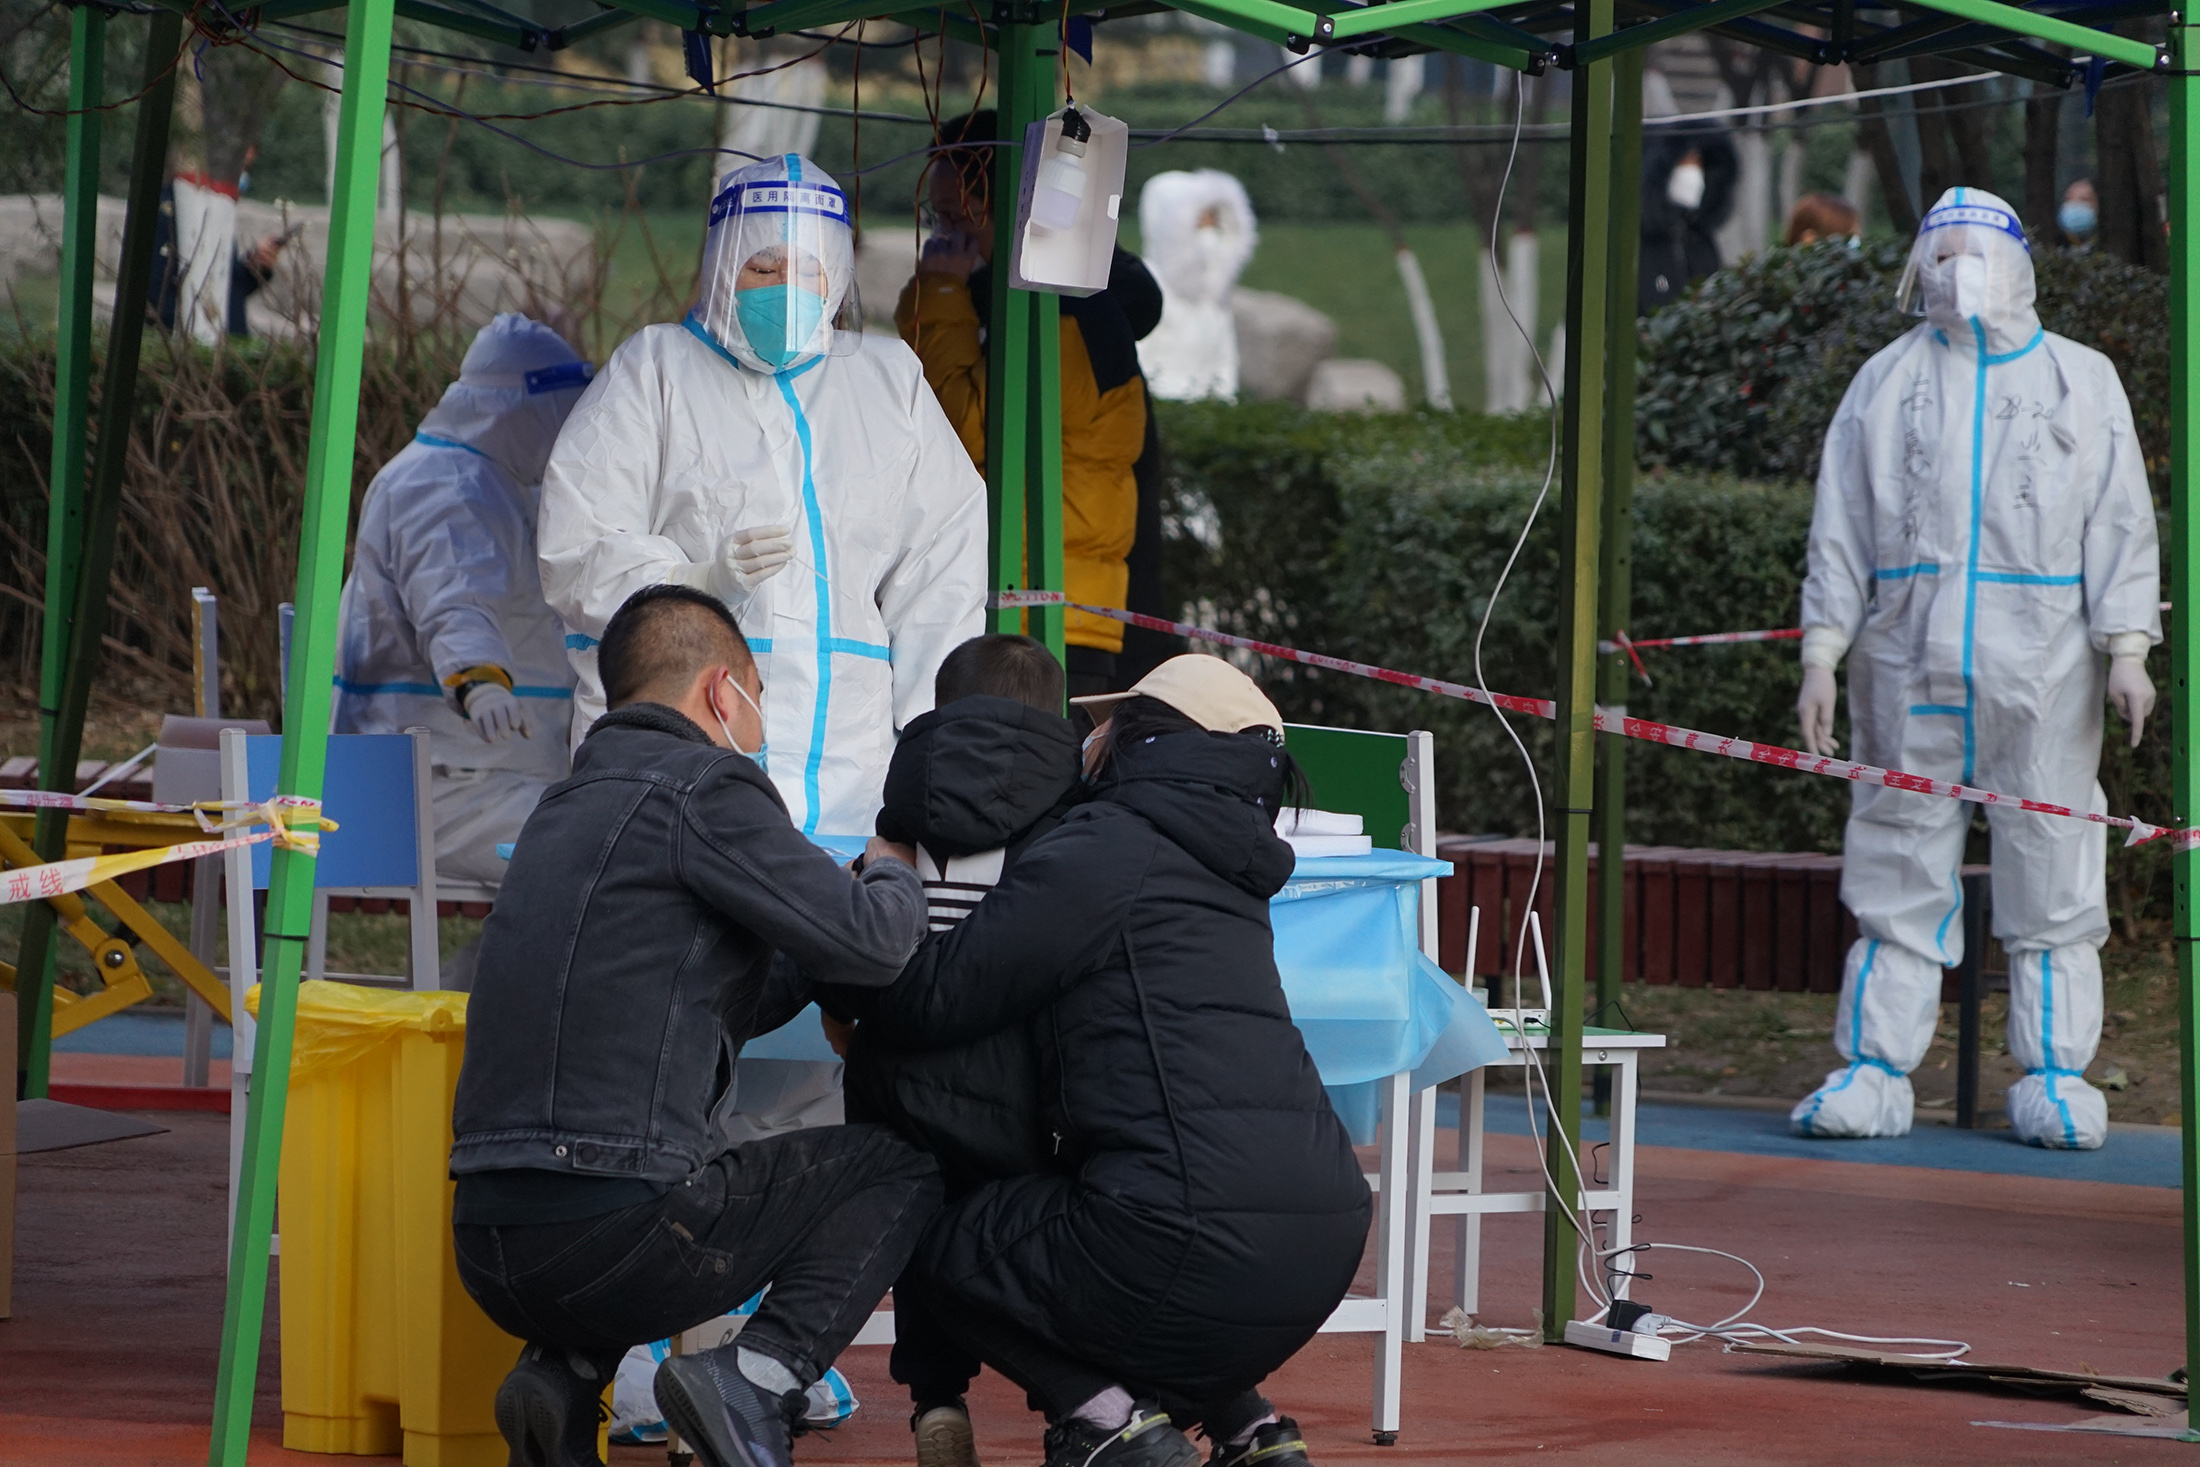 A health worker prepares to administer a nucleic acid in Xi ‘an on Dec. 29.